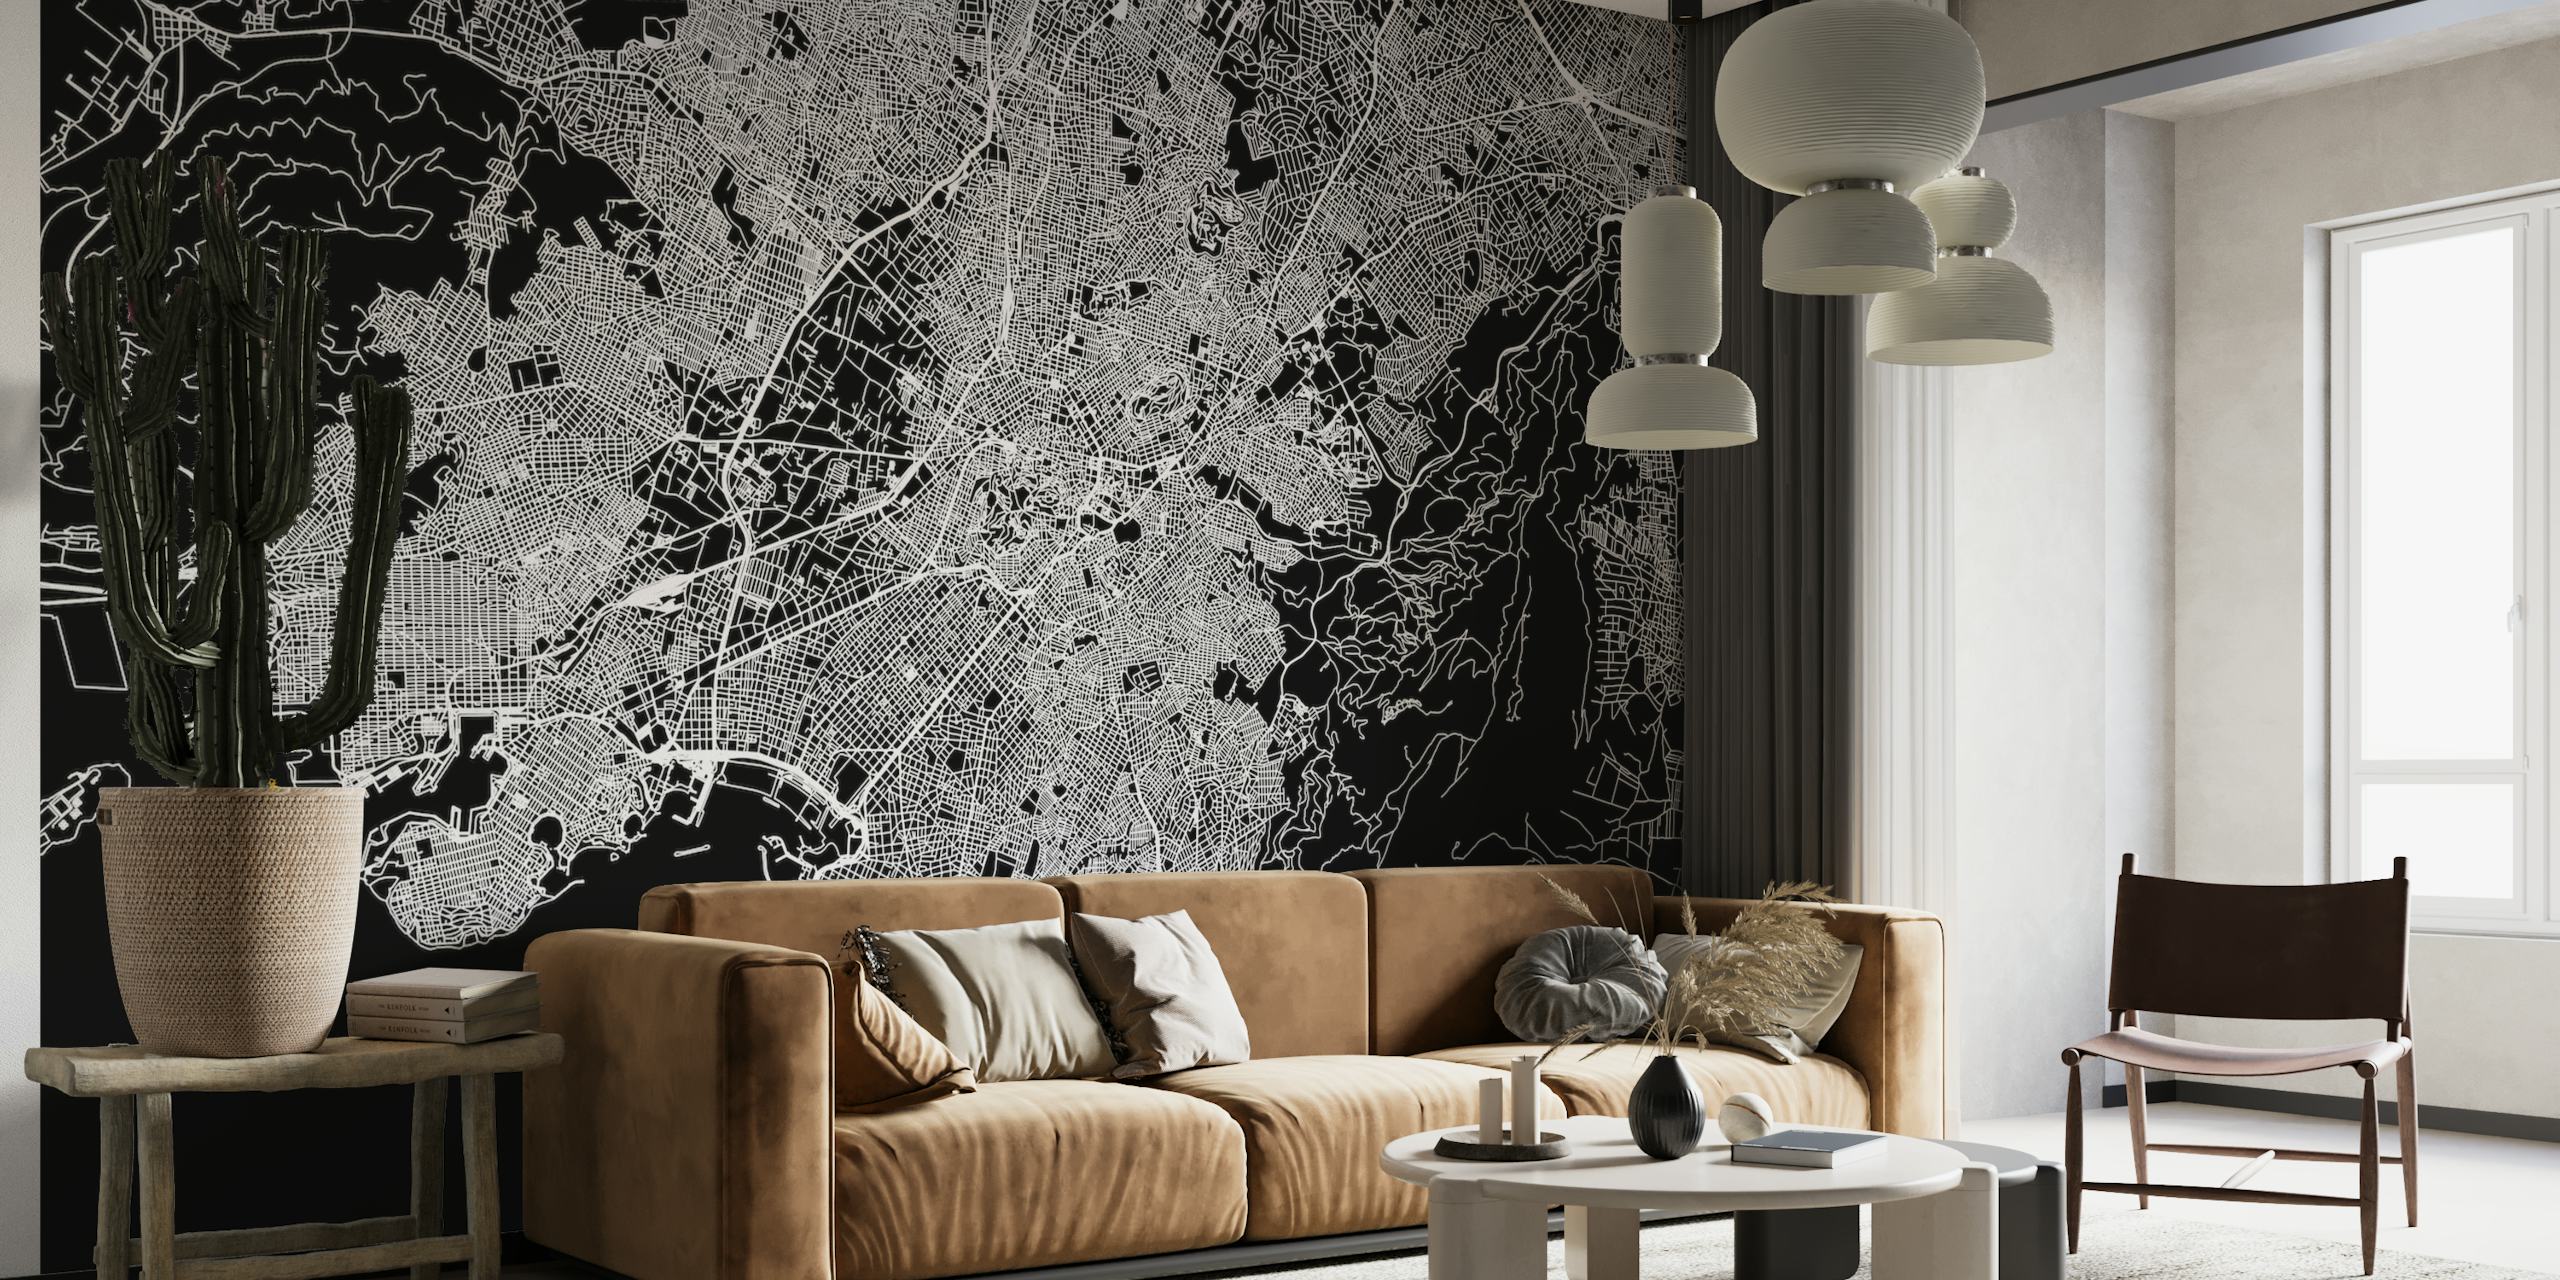 Monochrome detailed street map wall mural of Athens, perfect for adding an urban touch to interiors.